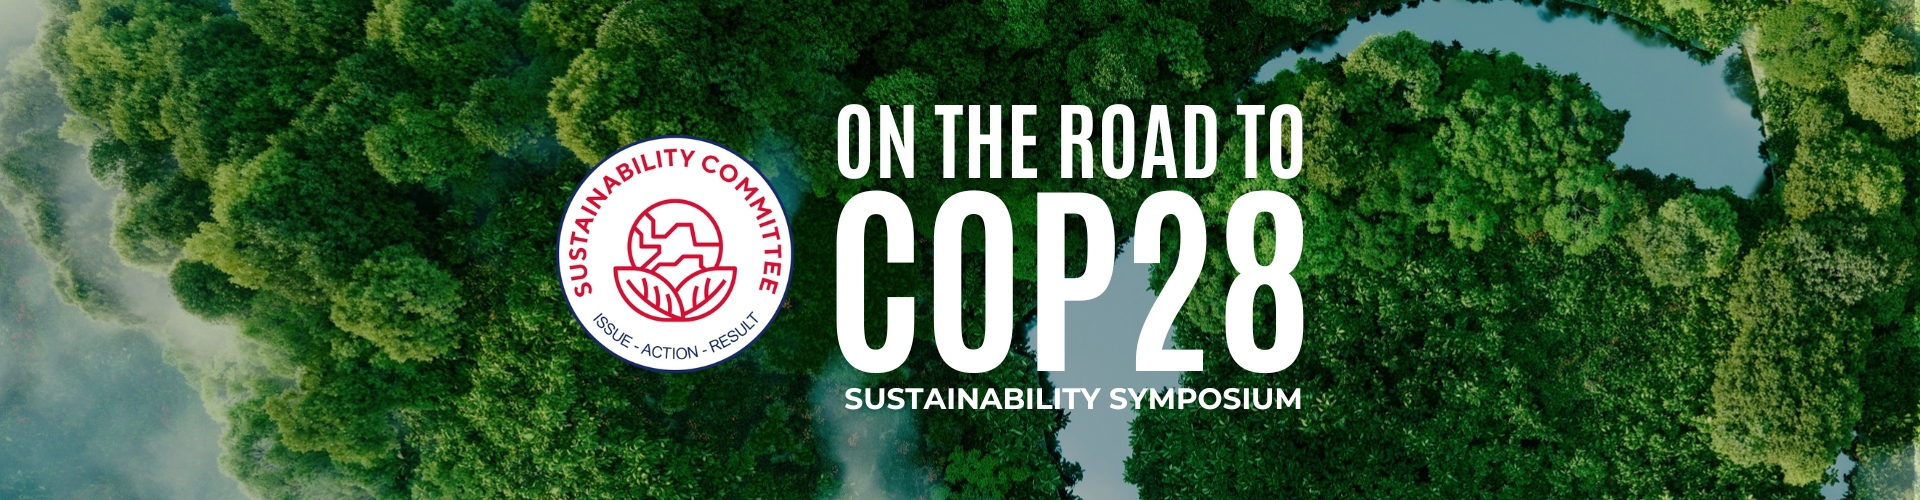 thumbnails "On the Road to COP28" Sustainability Symposium